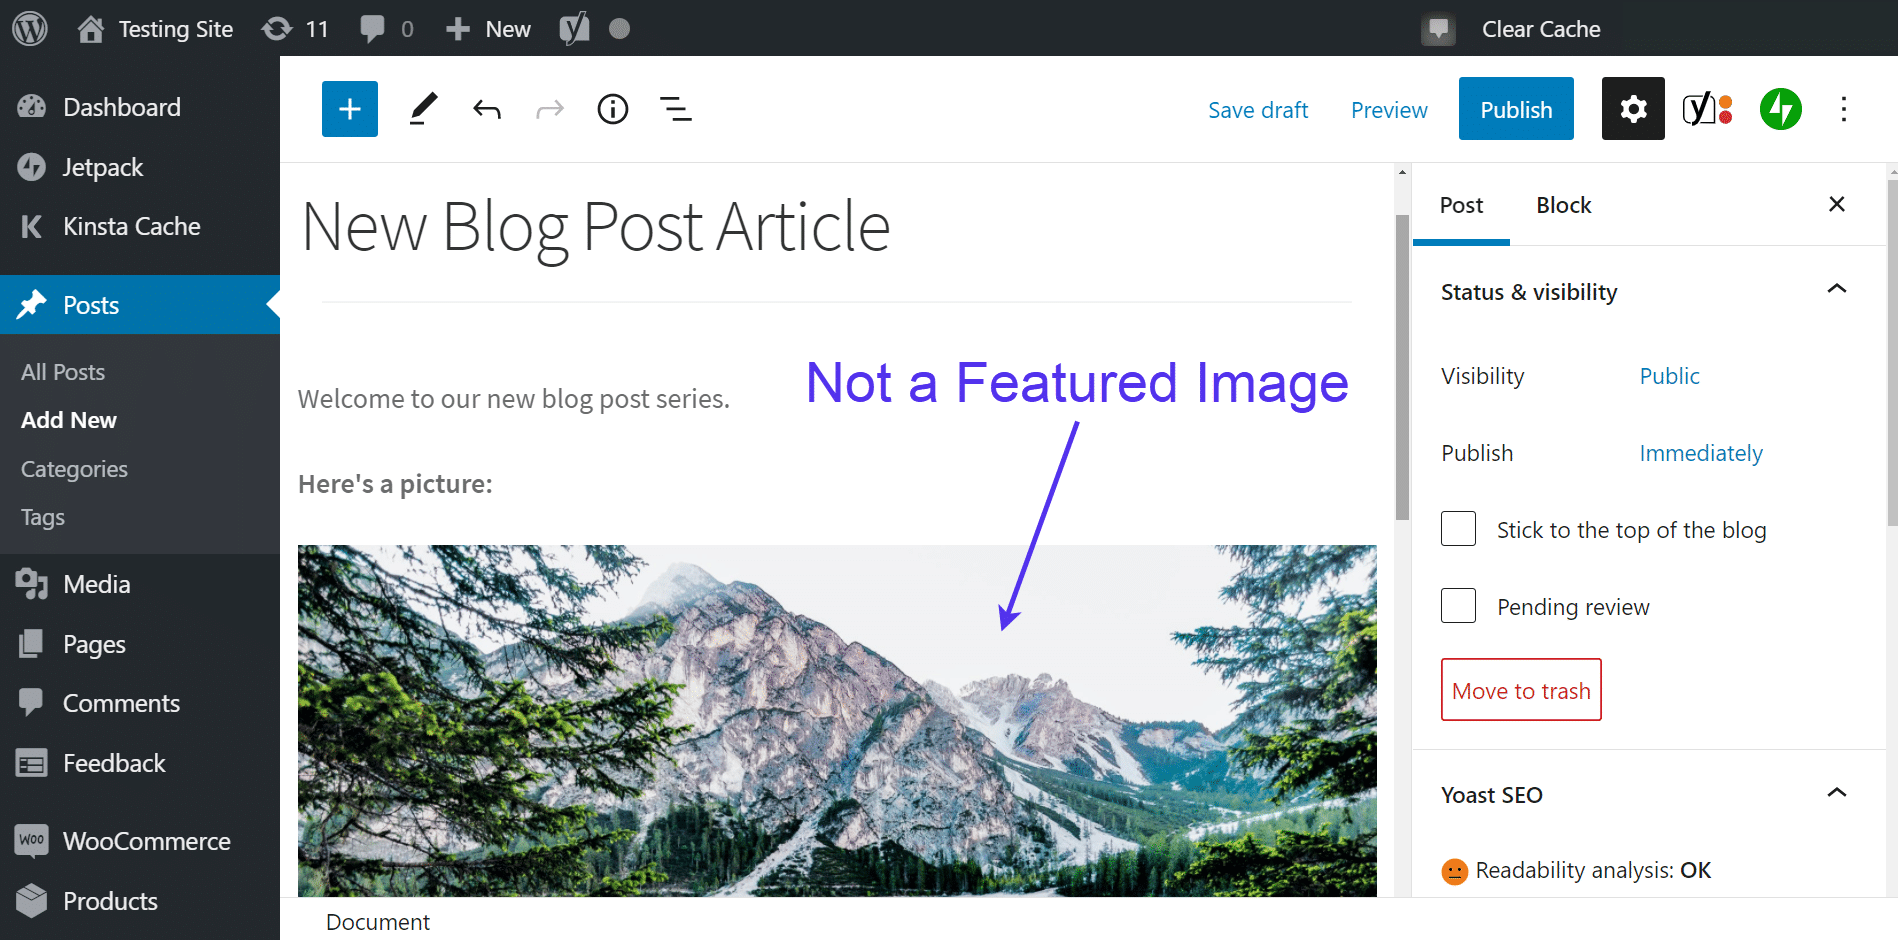 This is not a featured image